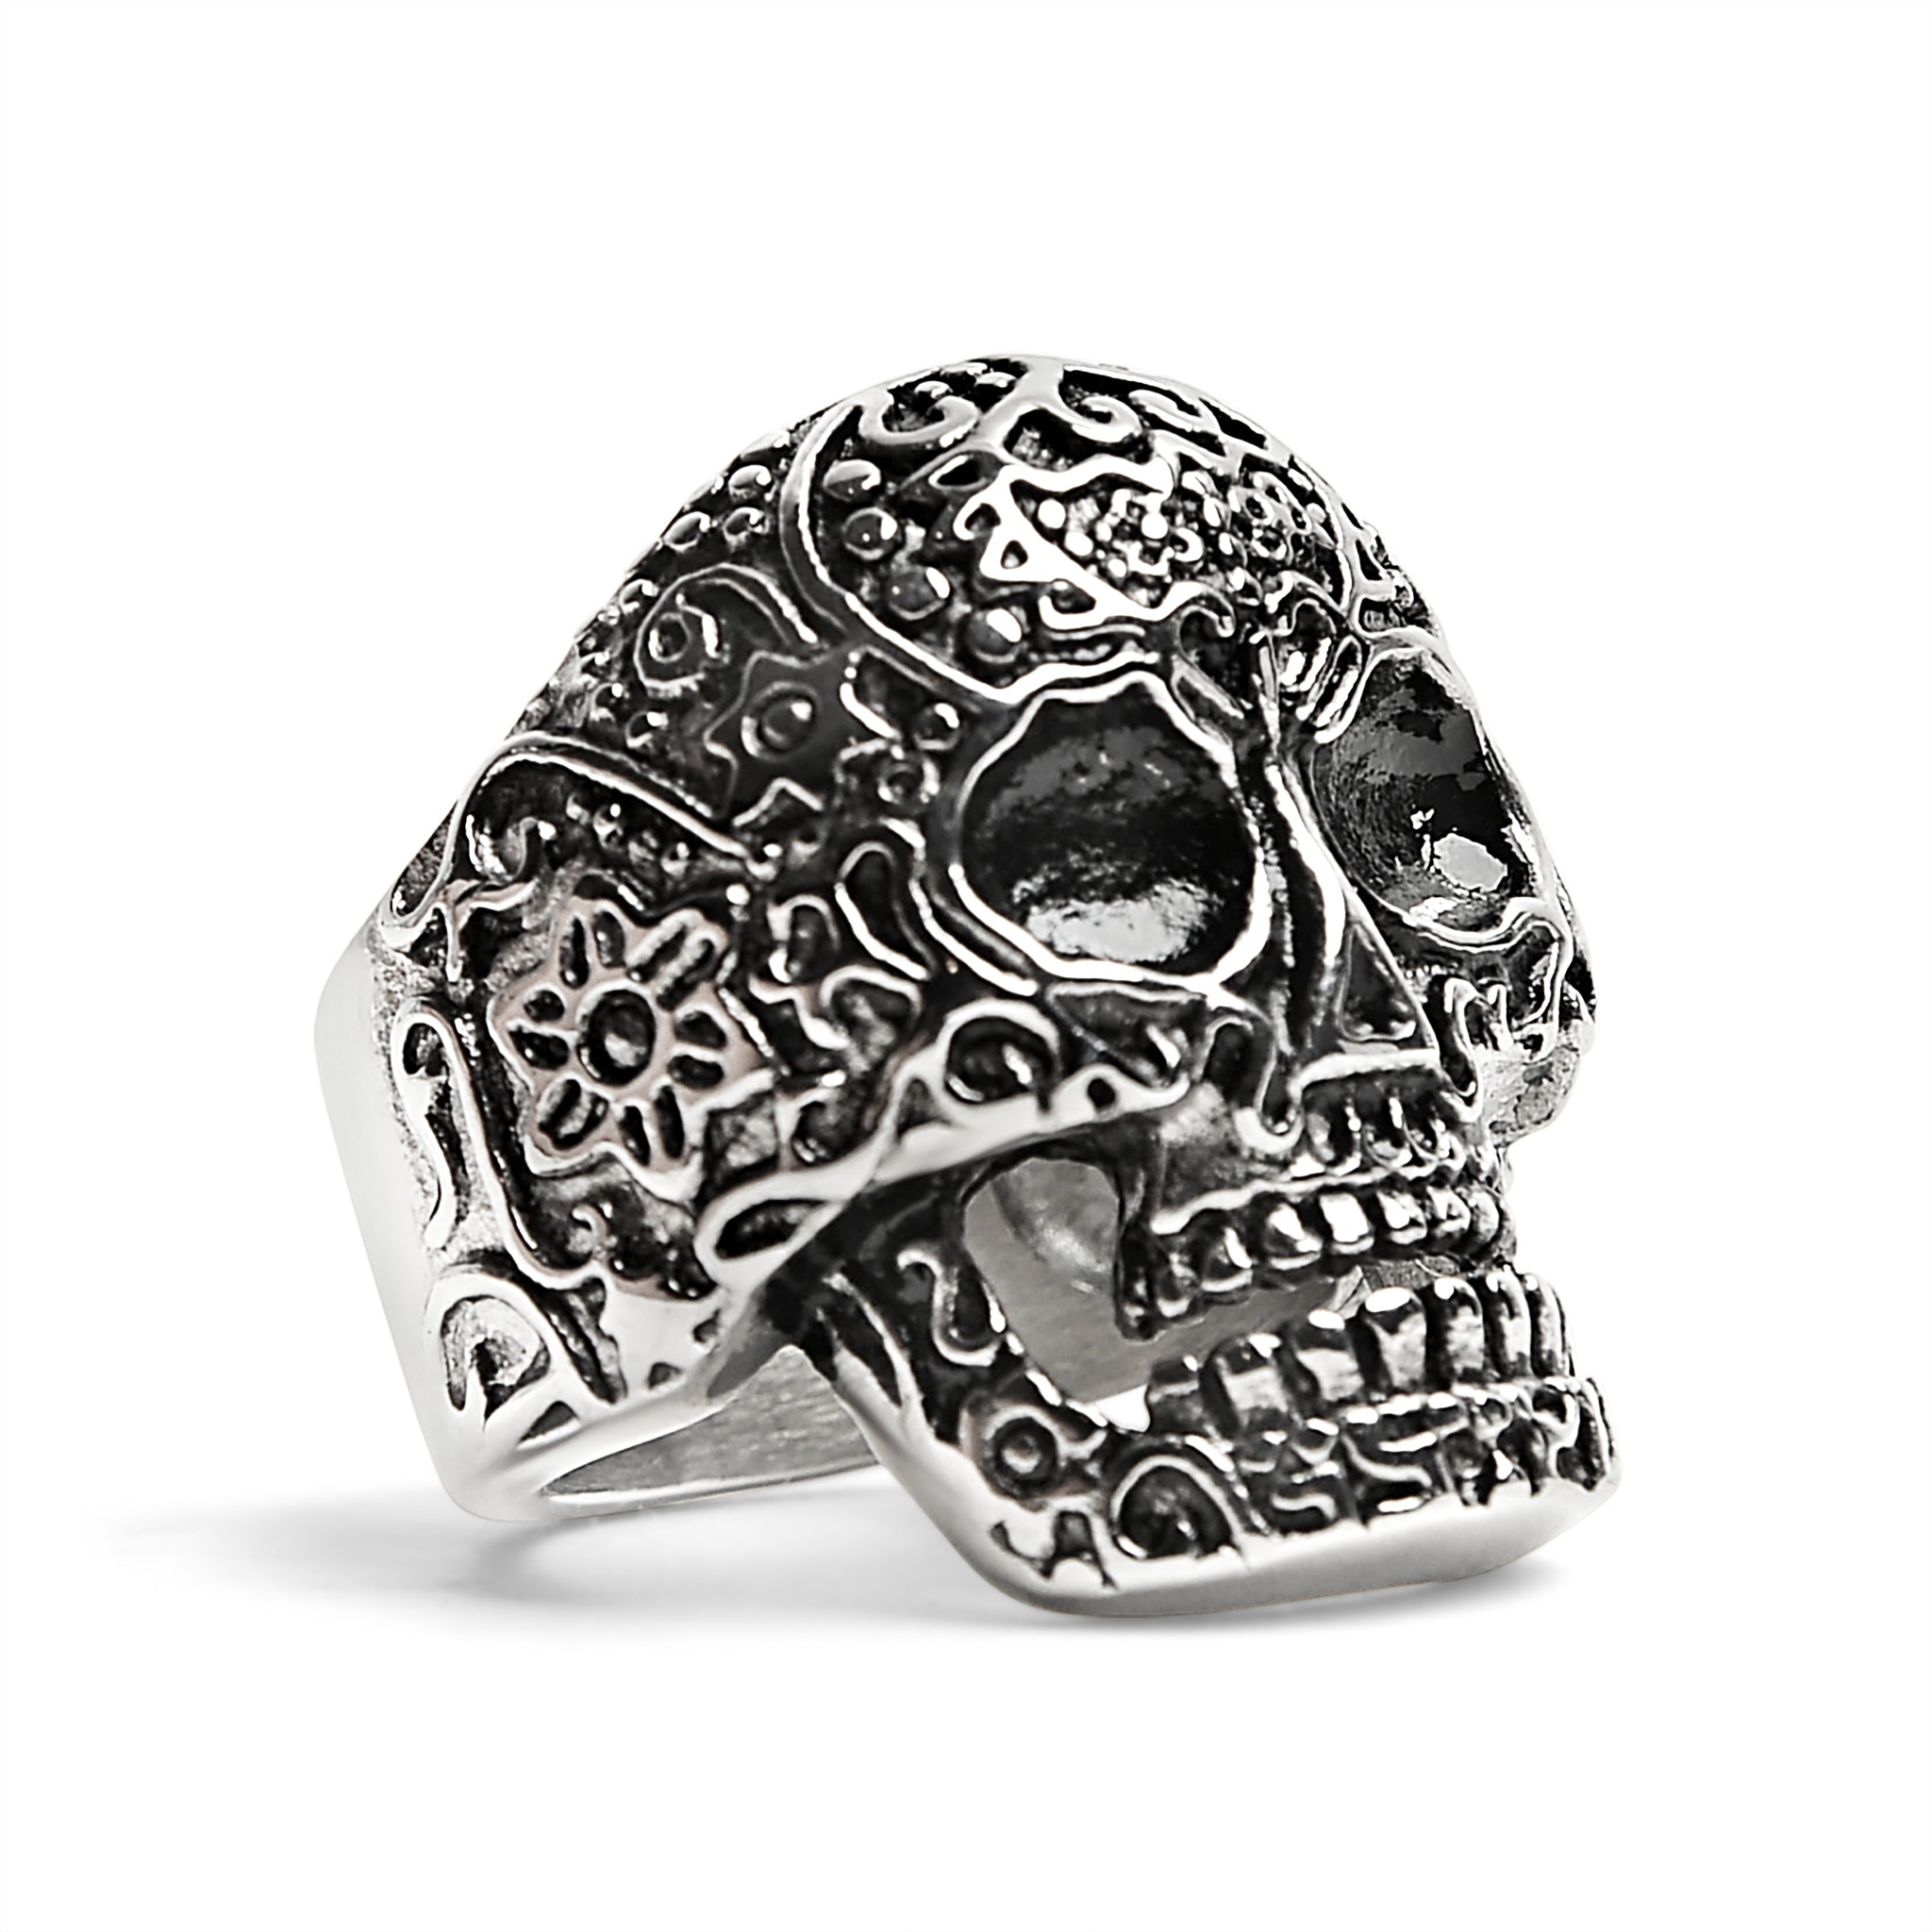 Detailed Skull Stainless Steel Ring - Durable and Hypoallergenic Jewelry for Men Bijou Her